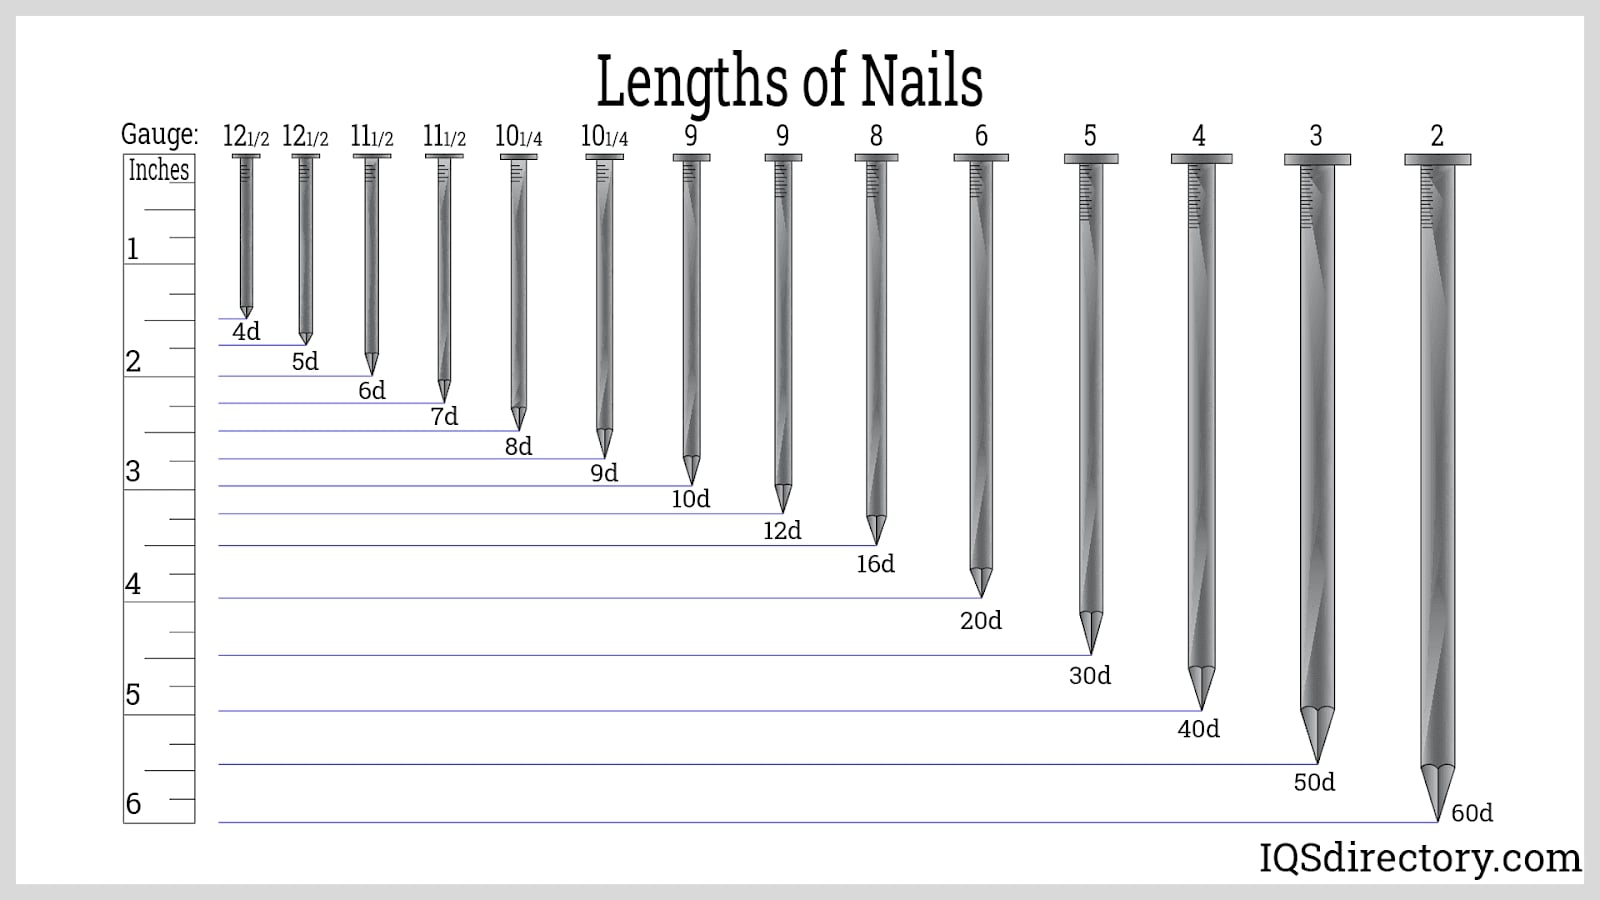 Lengths of Nails